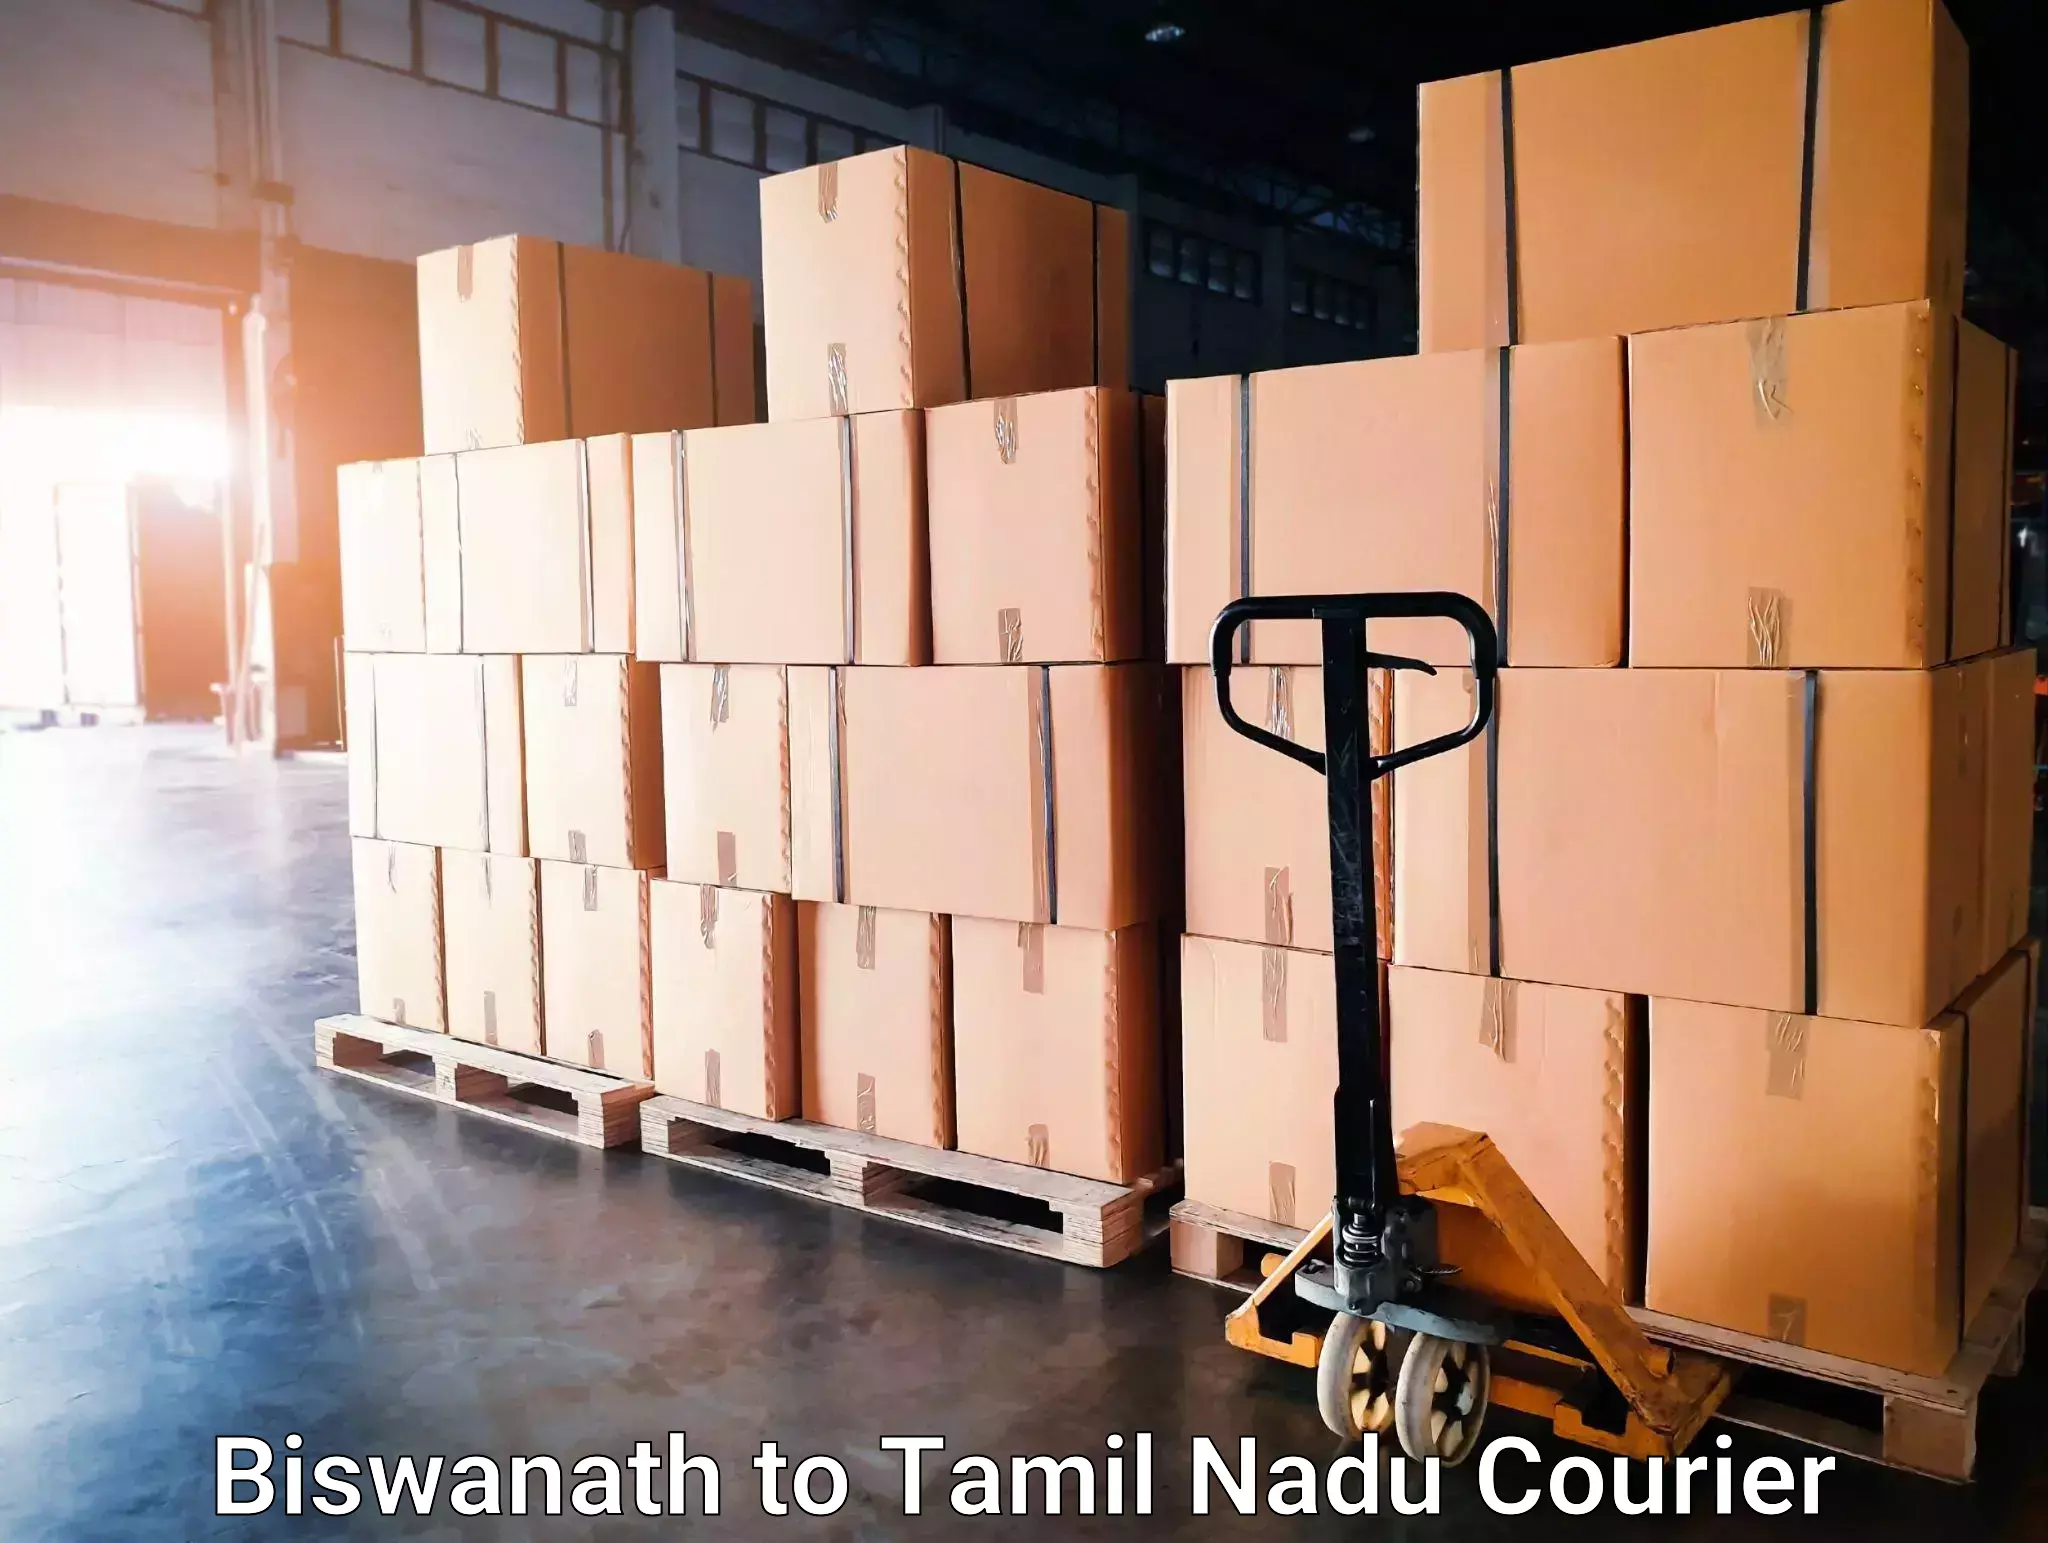 On-call courier service Biswanath to Perambalur